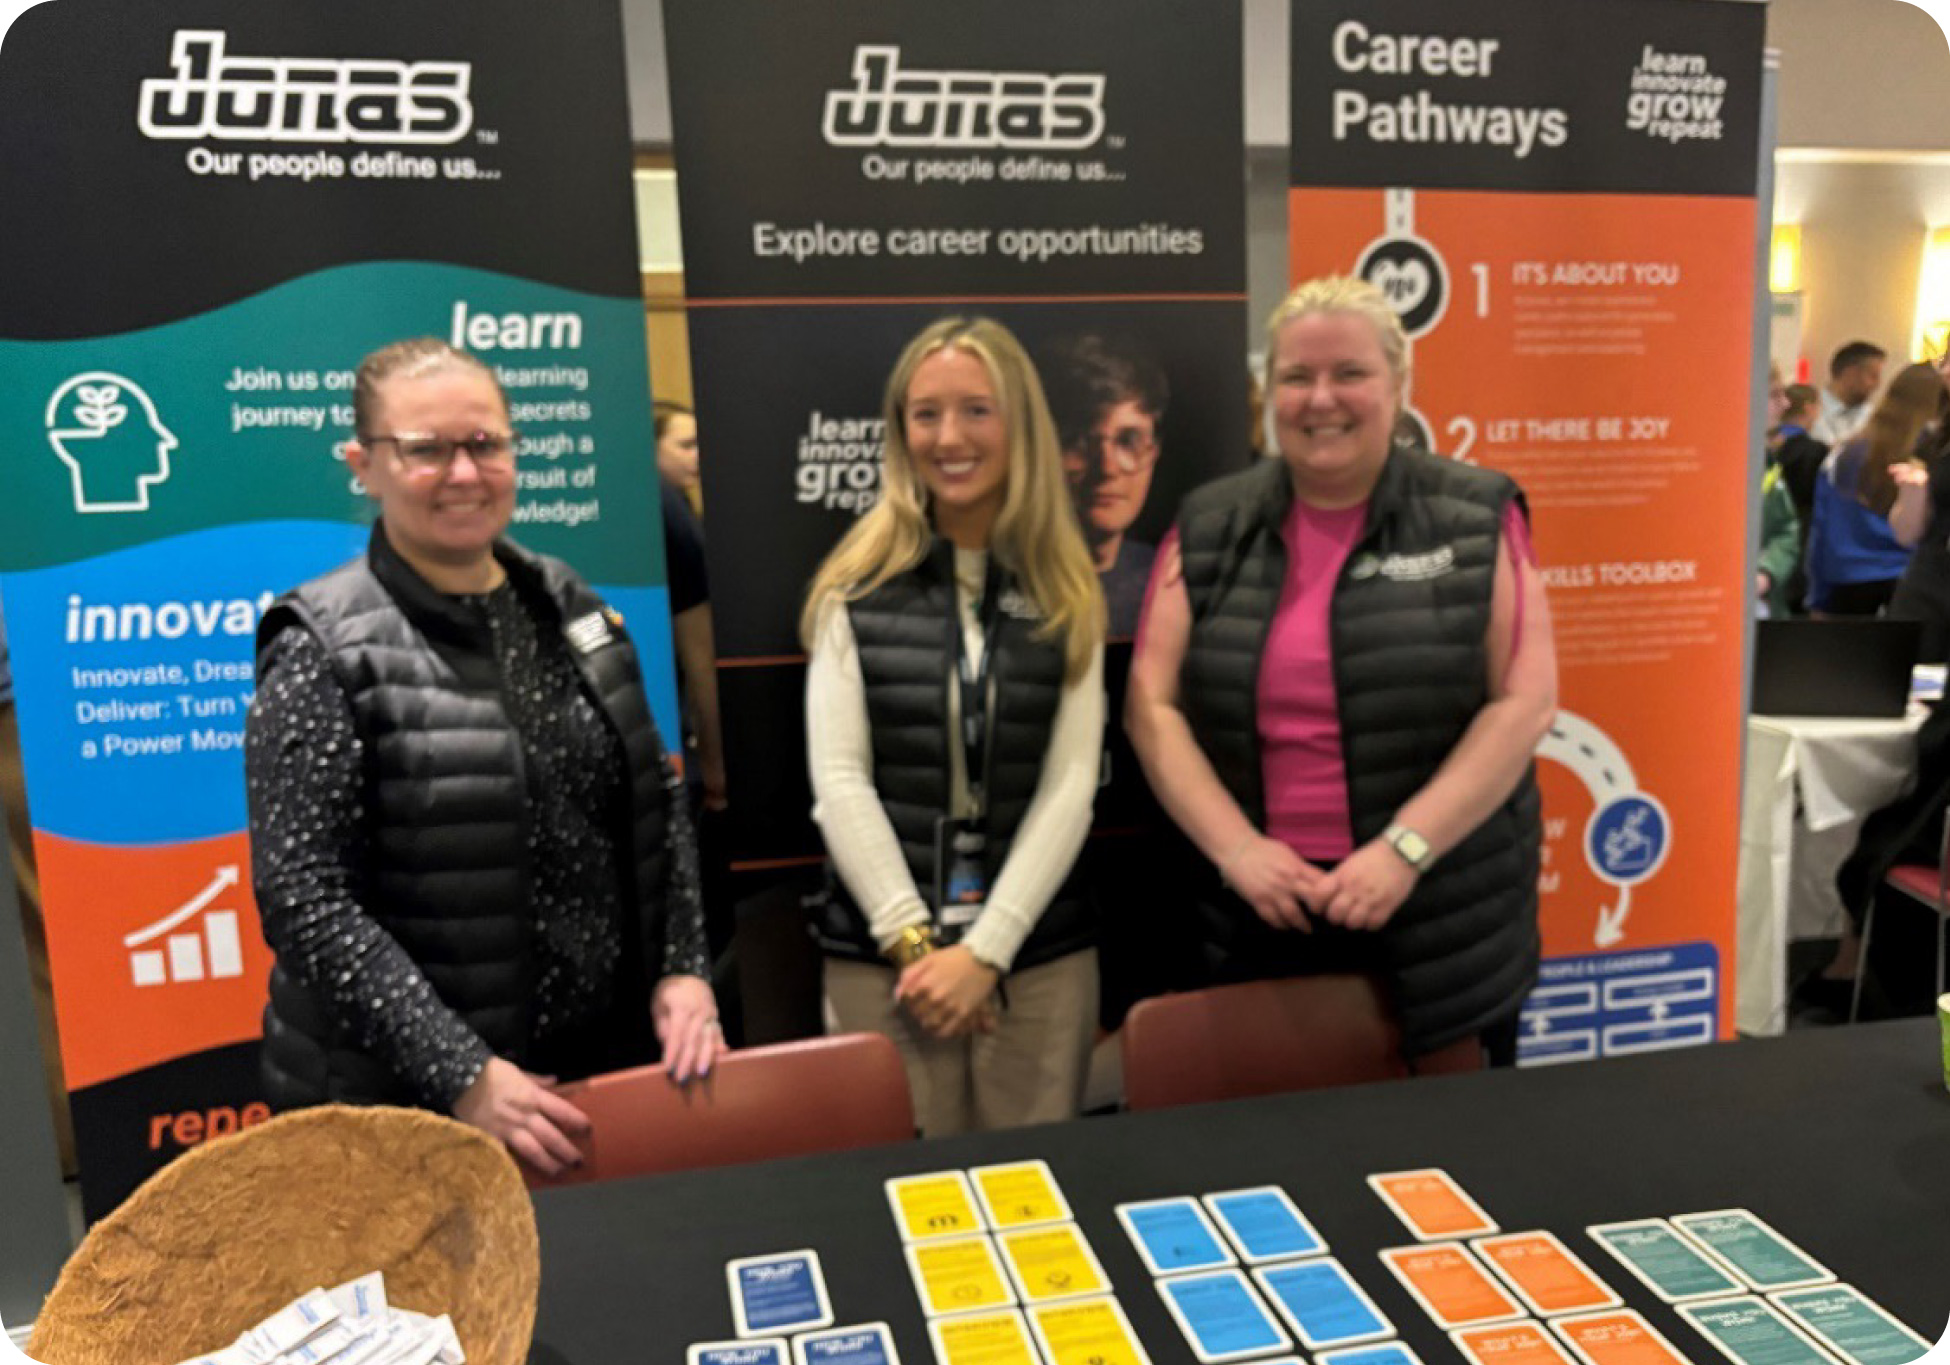 Jonas Software employees promote career opportunities at student careers event.